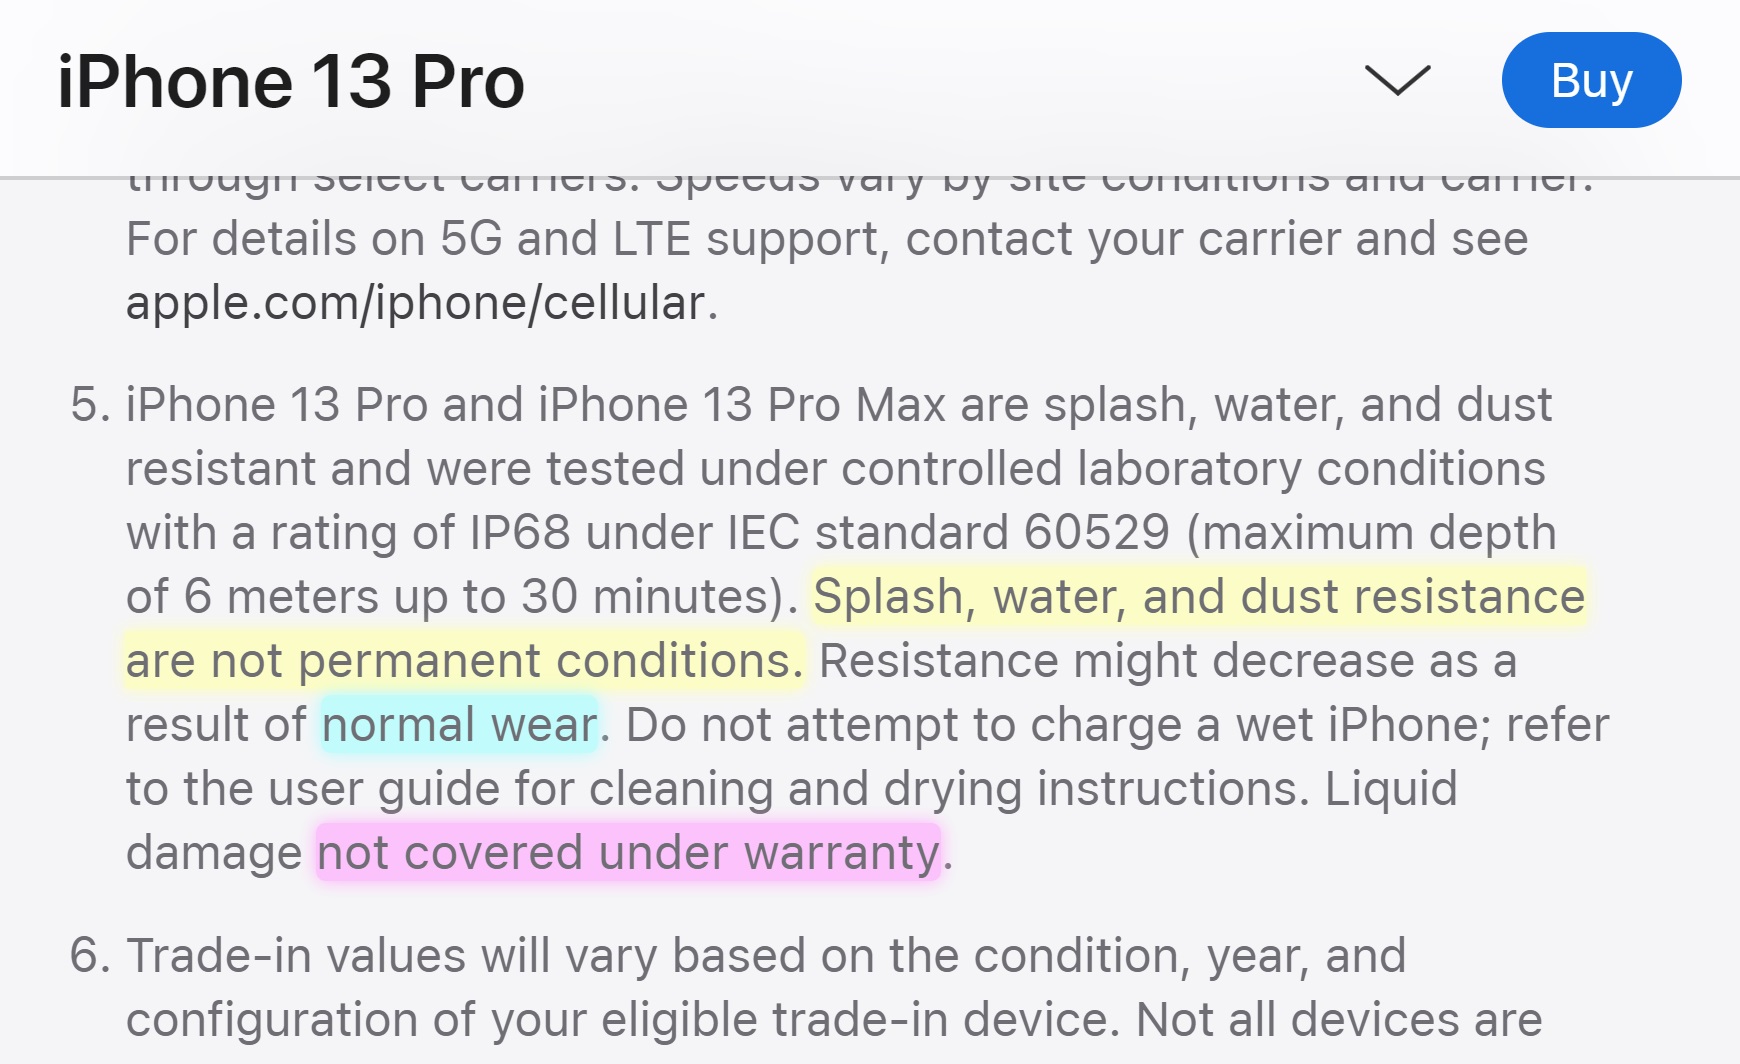 iphone water resistance claims 2